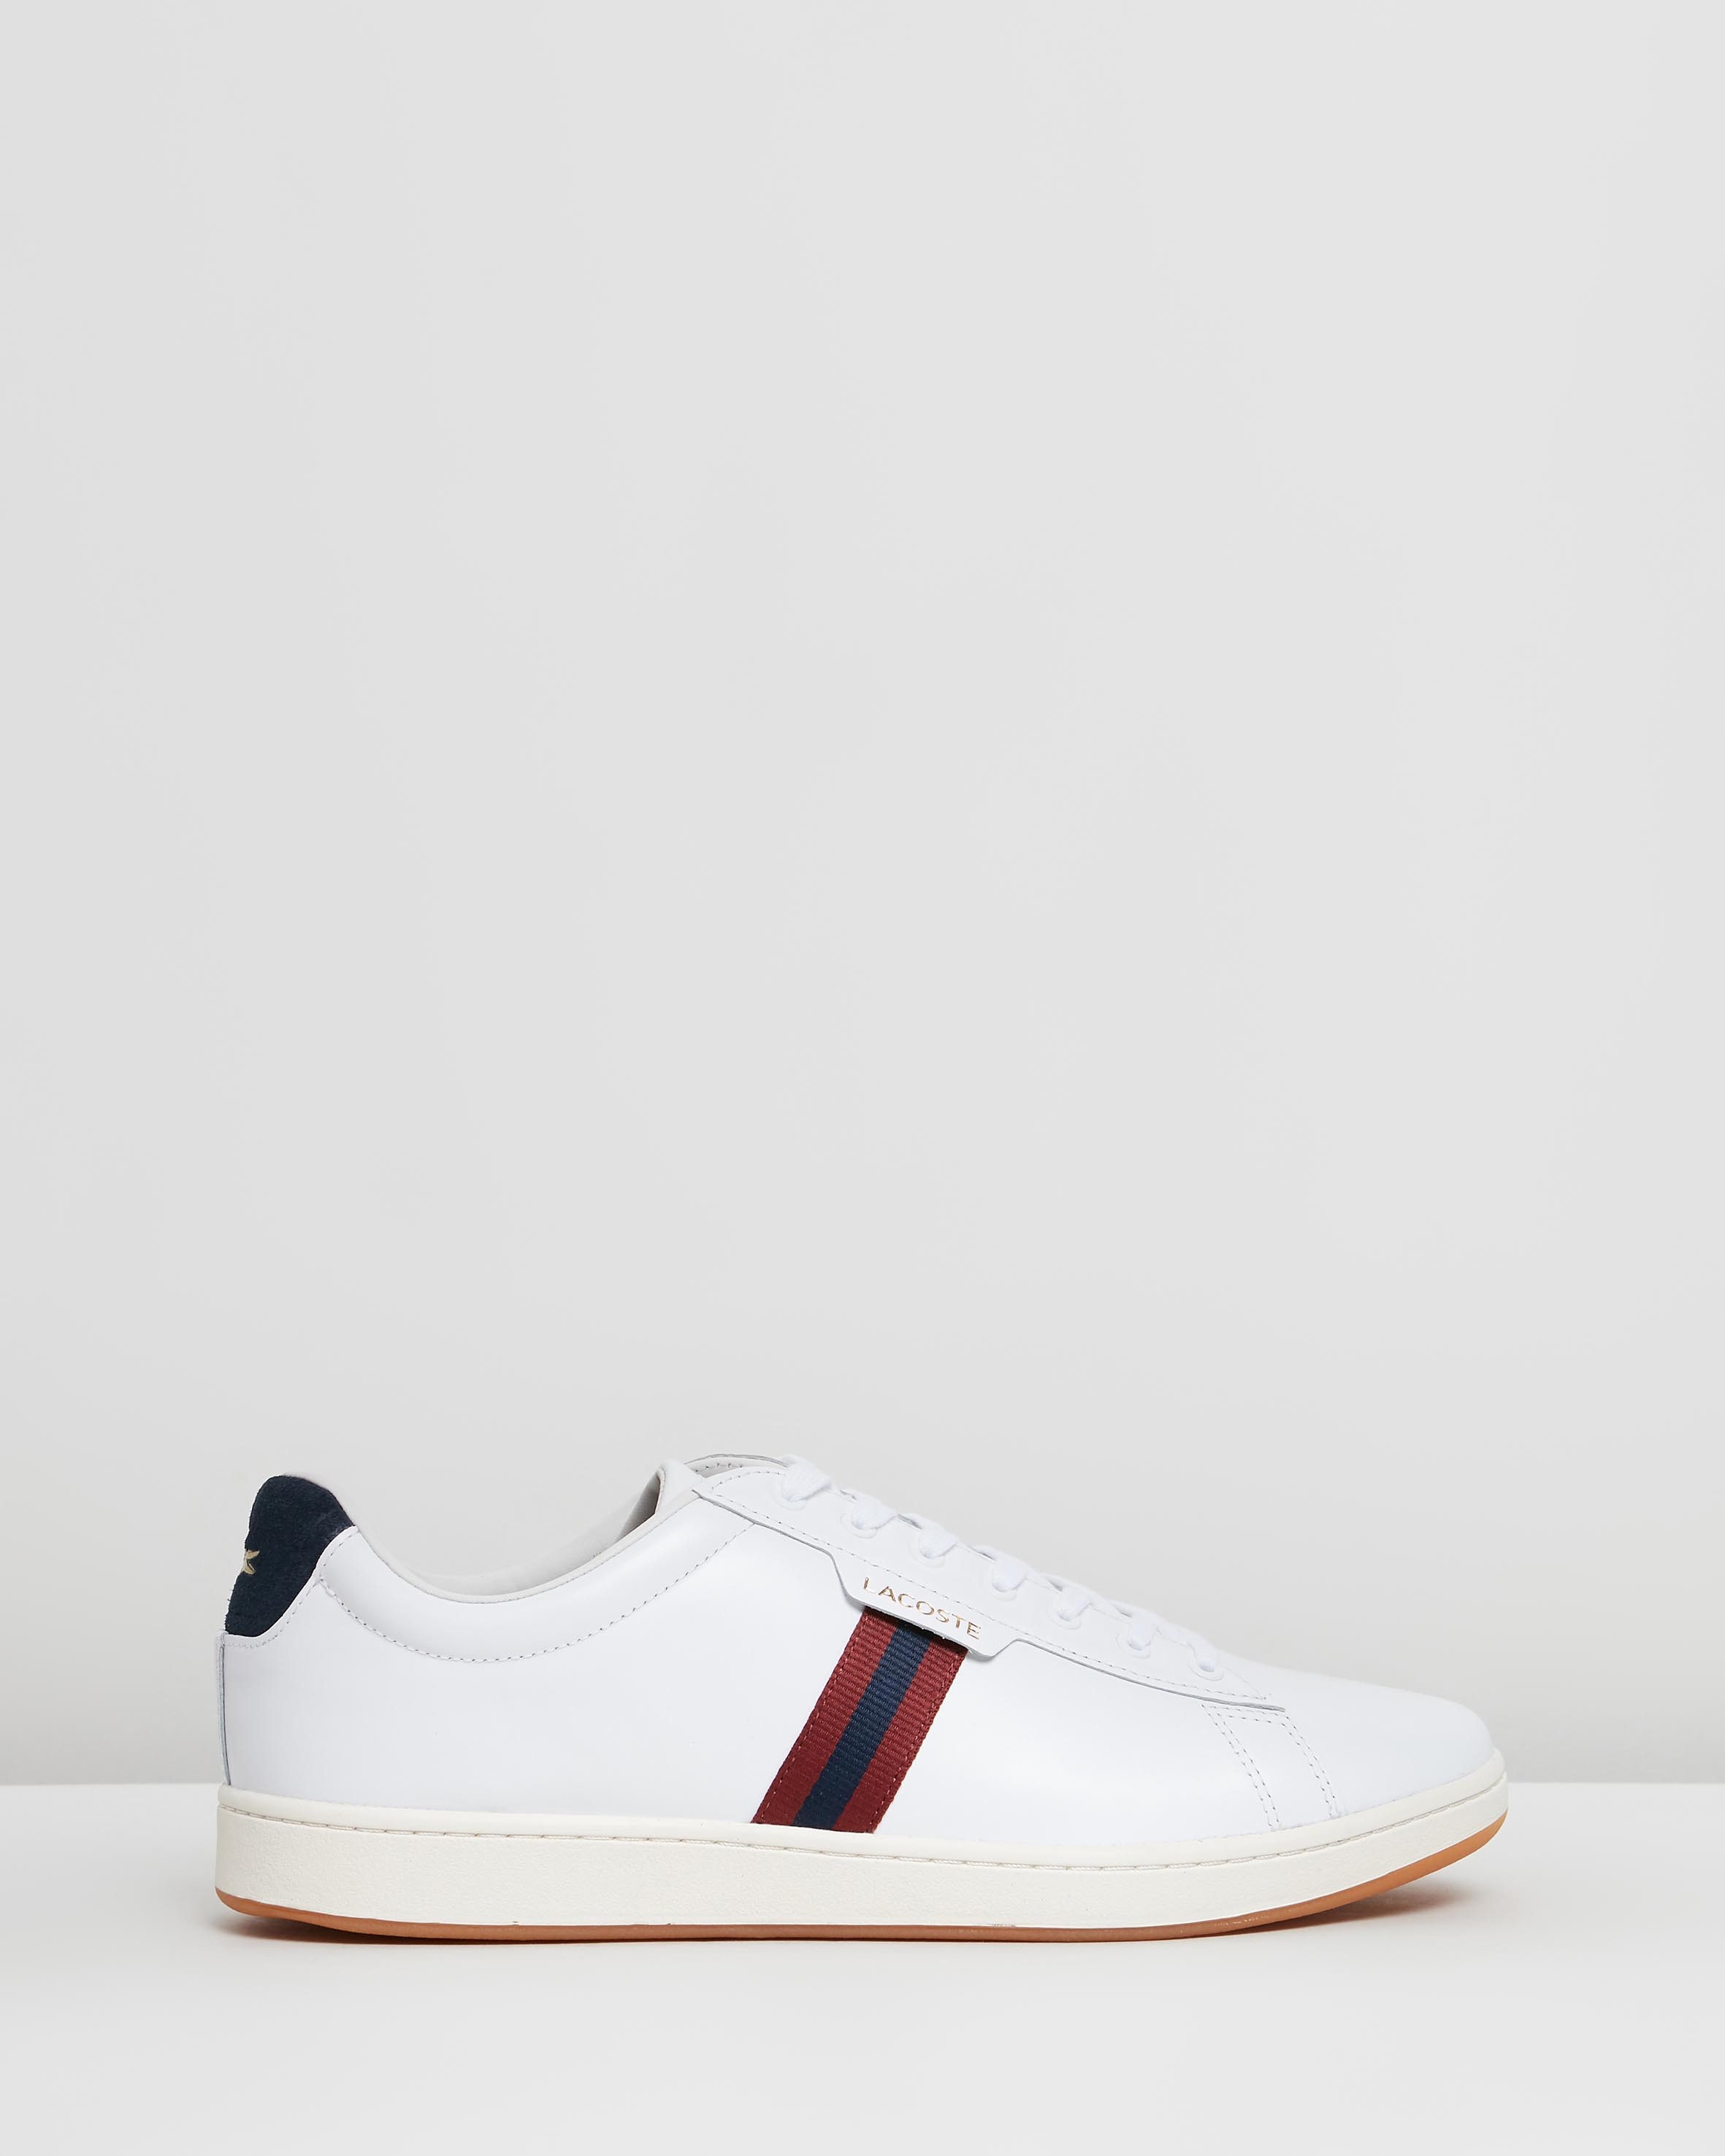 Carnaby Evo - Men's White, Navy & Red by Lacoste | ShoeSales